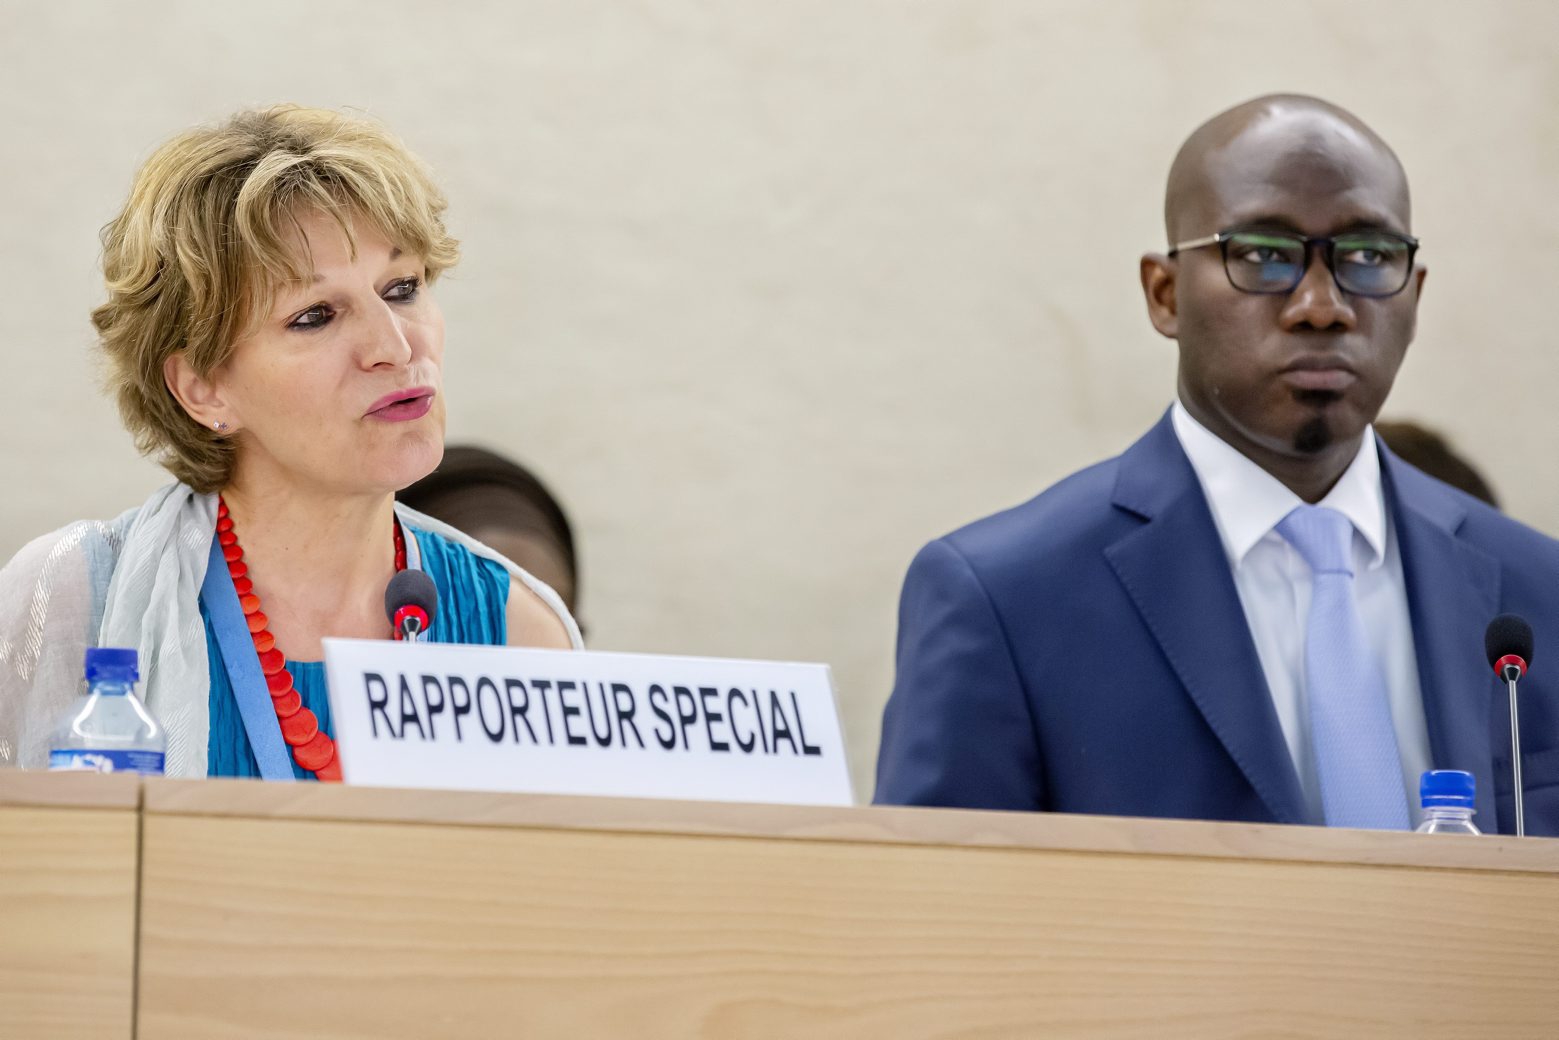 Agnes Callamard, left, UN Special Rapporteur on extrajudicial, summary and arbitrary executions, next to Coly Seck, President of the Human Rights Council, while presenting the main findings of the inquiry into the killing of Saudi journalist Jamal Khashoggi, during the 41th session of the Human Rights Council, at the European headquarters of the United Nations in Geneva, Switzerland, on Wednesday, June 26, 2019. (KEYSTONE/Magali Girardin) SWITZERLAND UN REPORT JAMAL KHASHOGGI